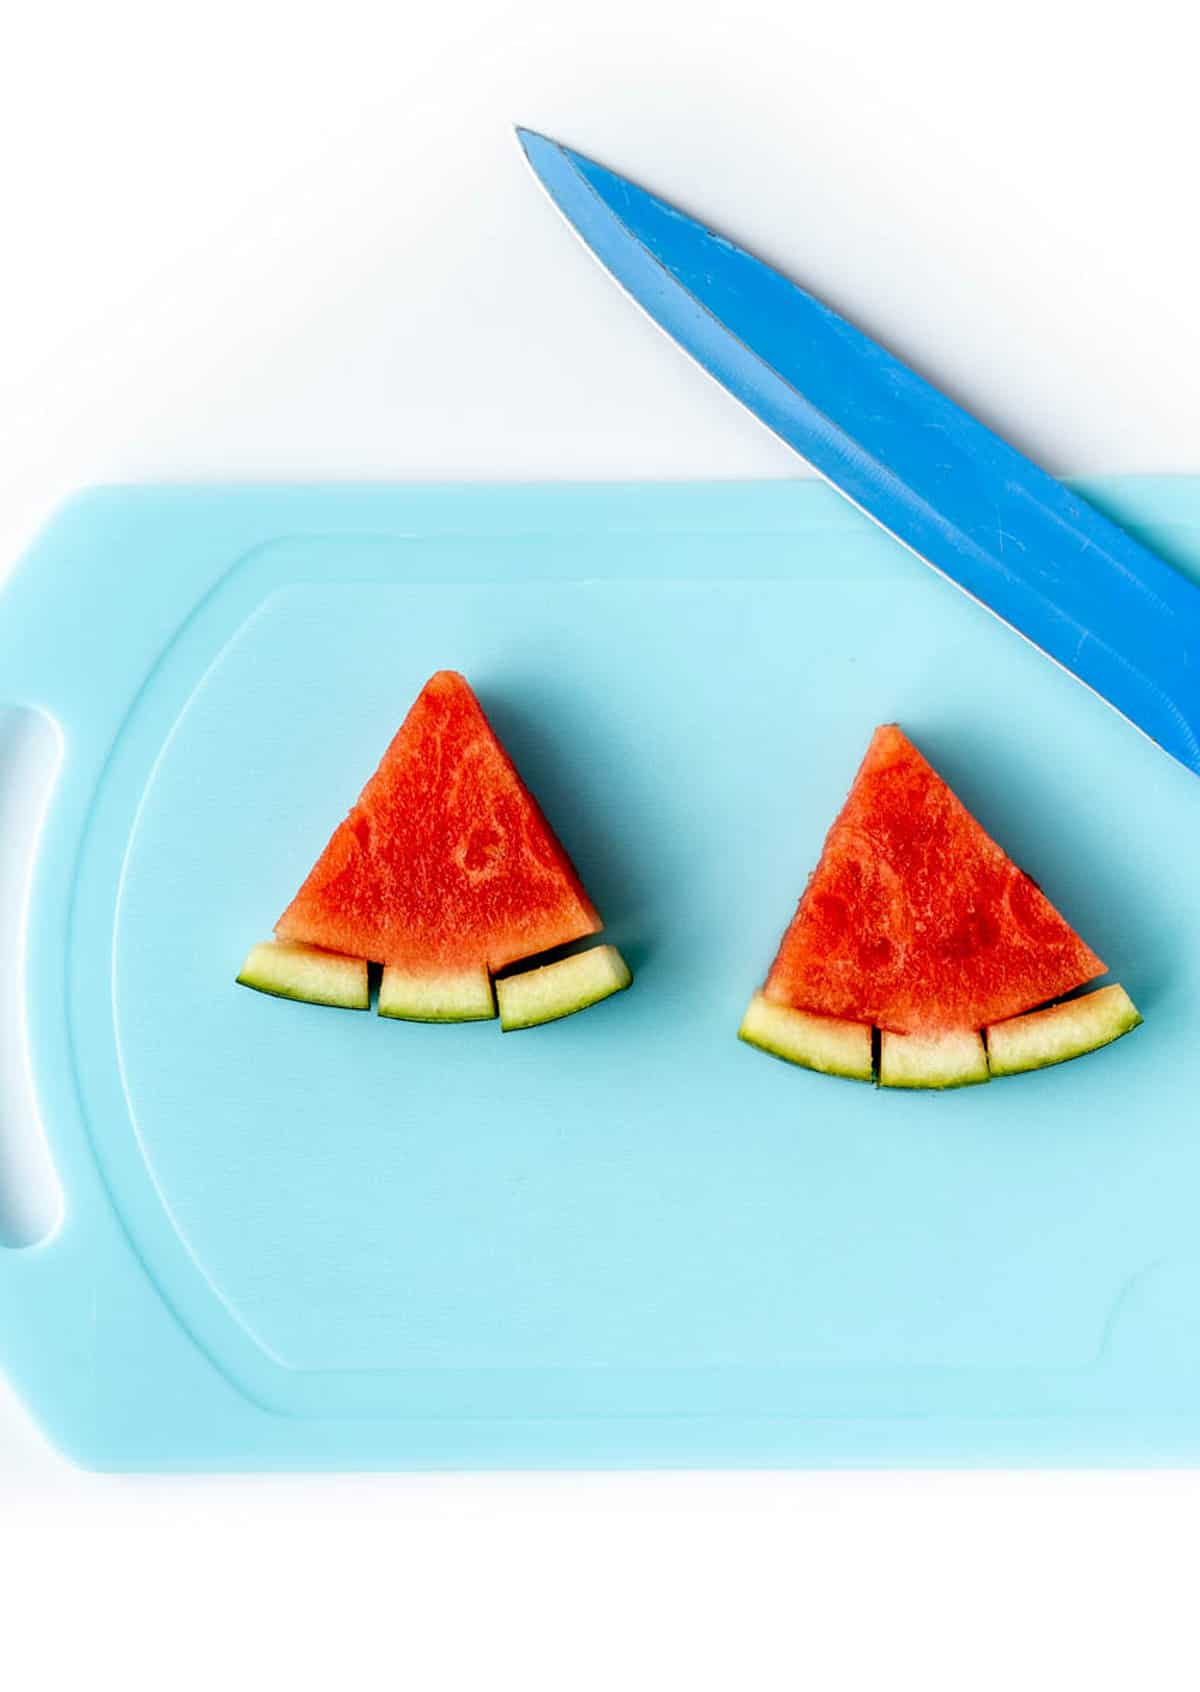 Two watermelon Christmas trees on a blue cutting board with a knife.